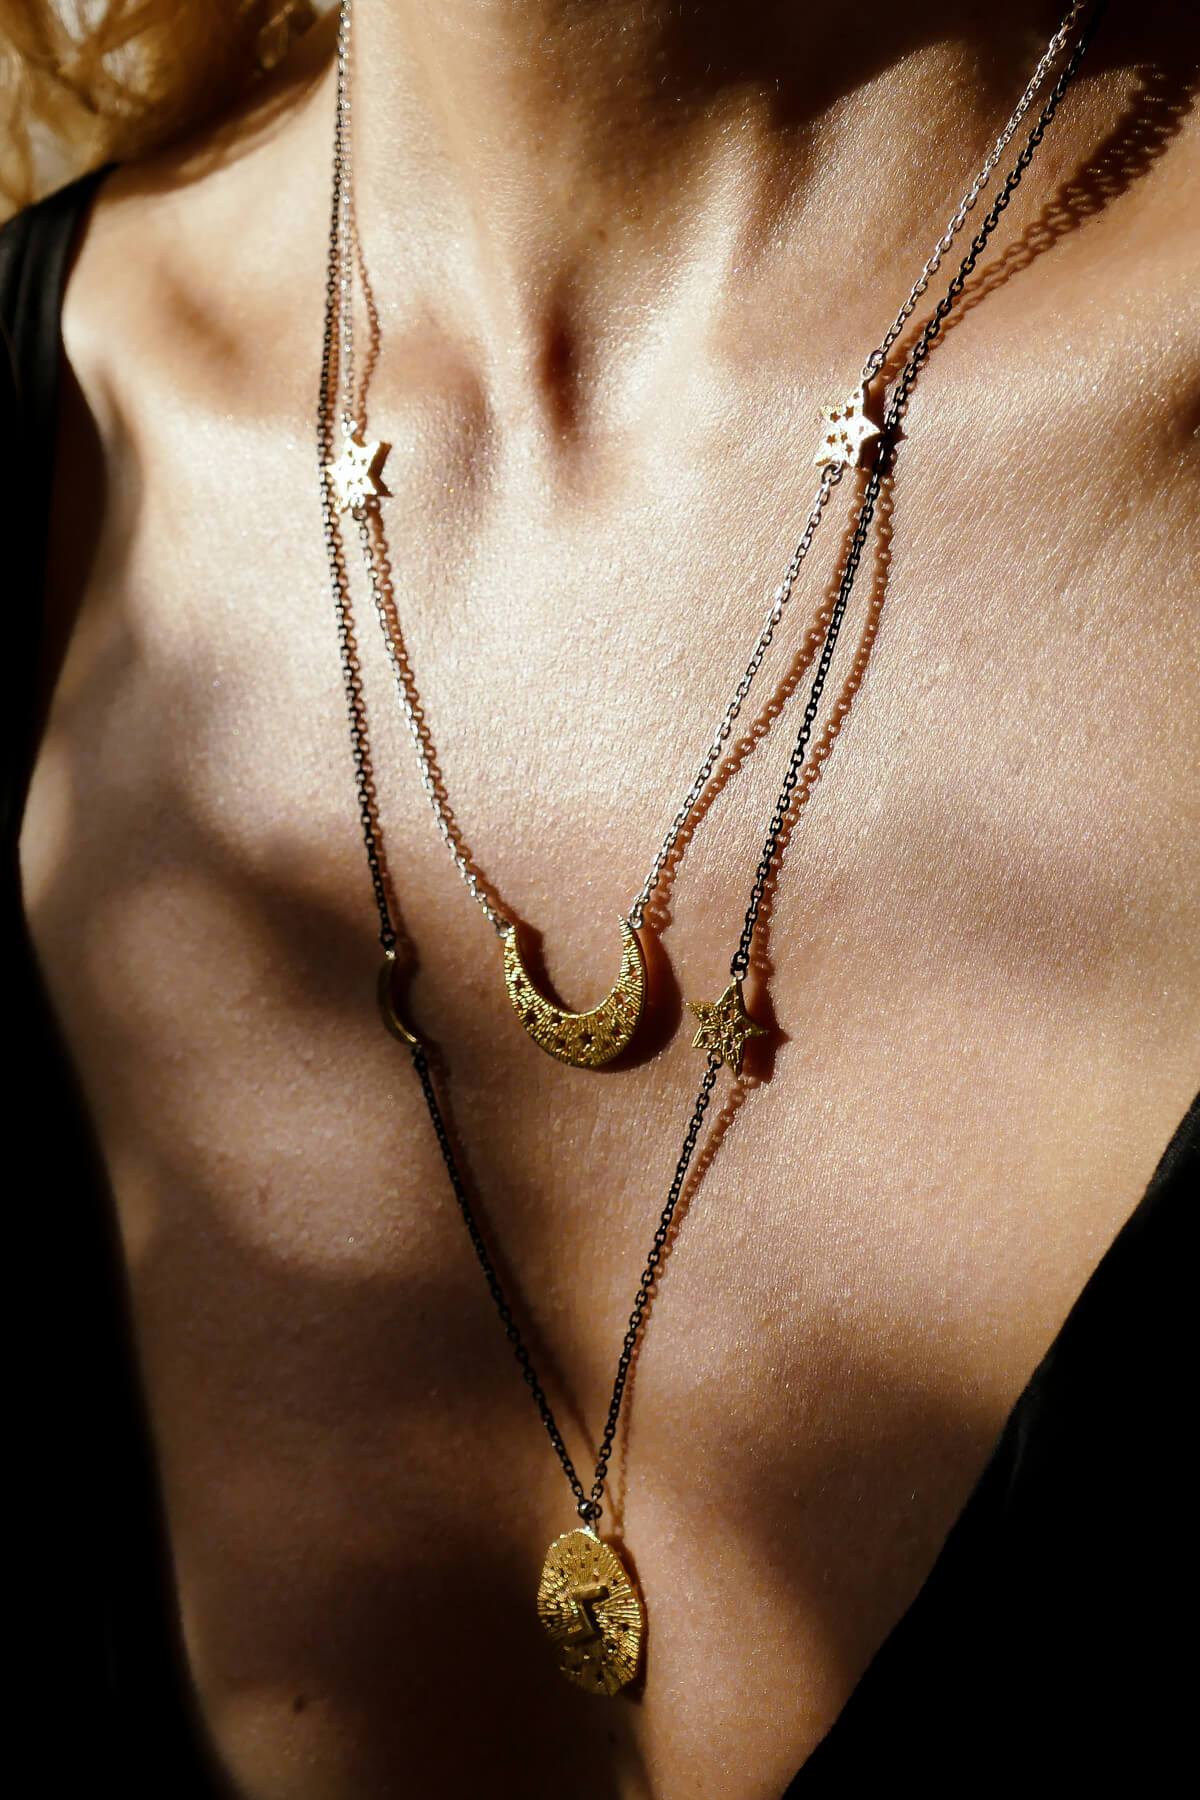 Moon swing with 2 stars on the chain necklace. Silver, partly gold-plated